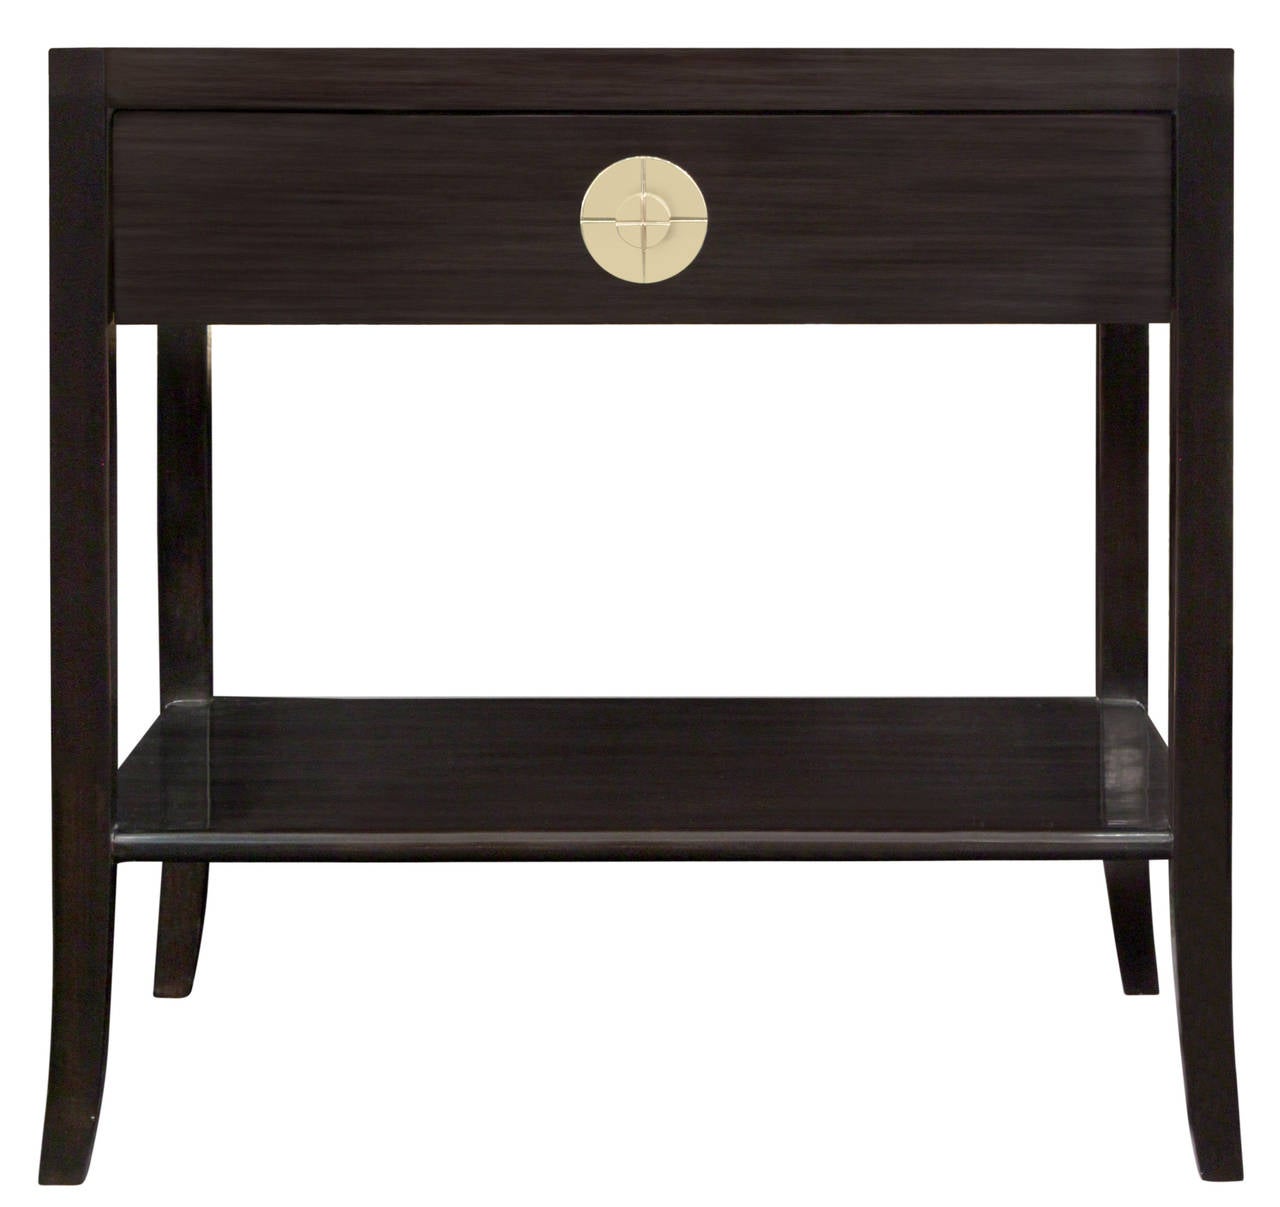 Elegant pair of bedside tables with single drawer and shelf, in dark mahogany with round incised brass pulls, by Tommi Parzinger for Parzinger Originals, American, 1950s.